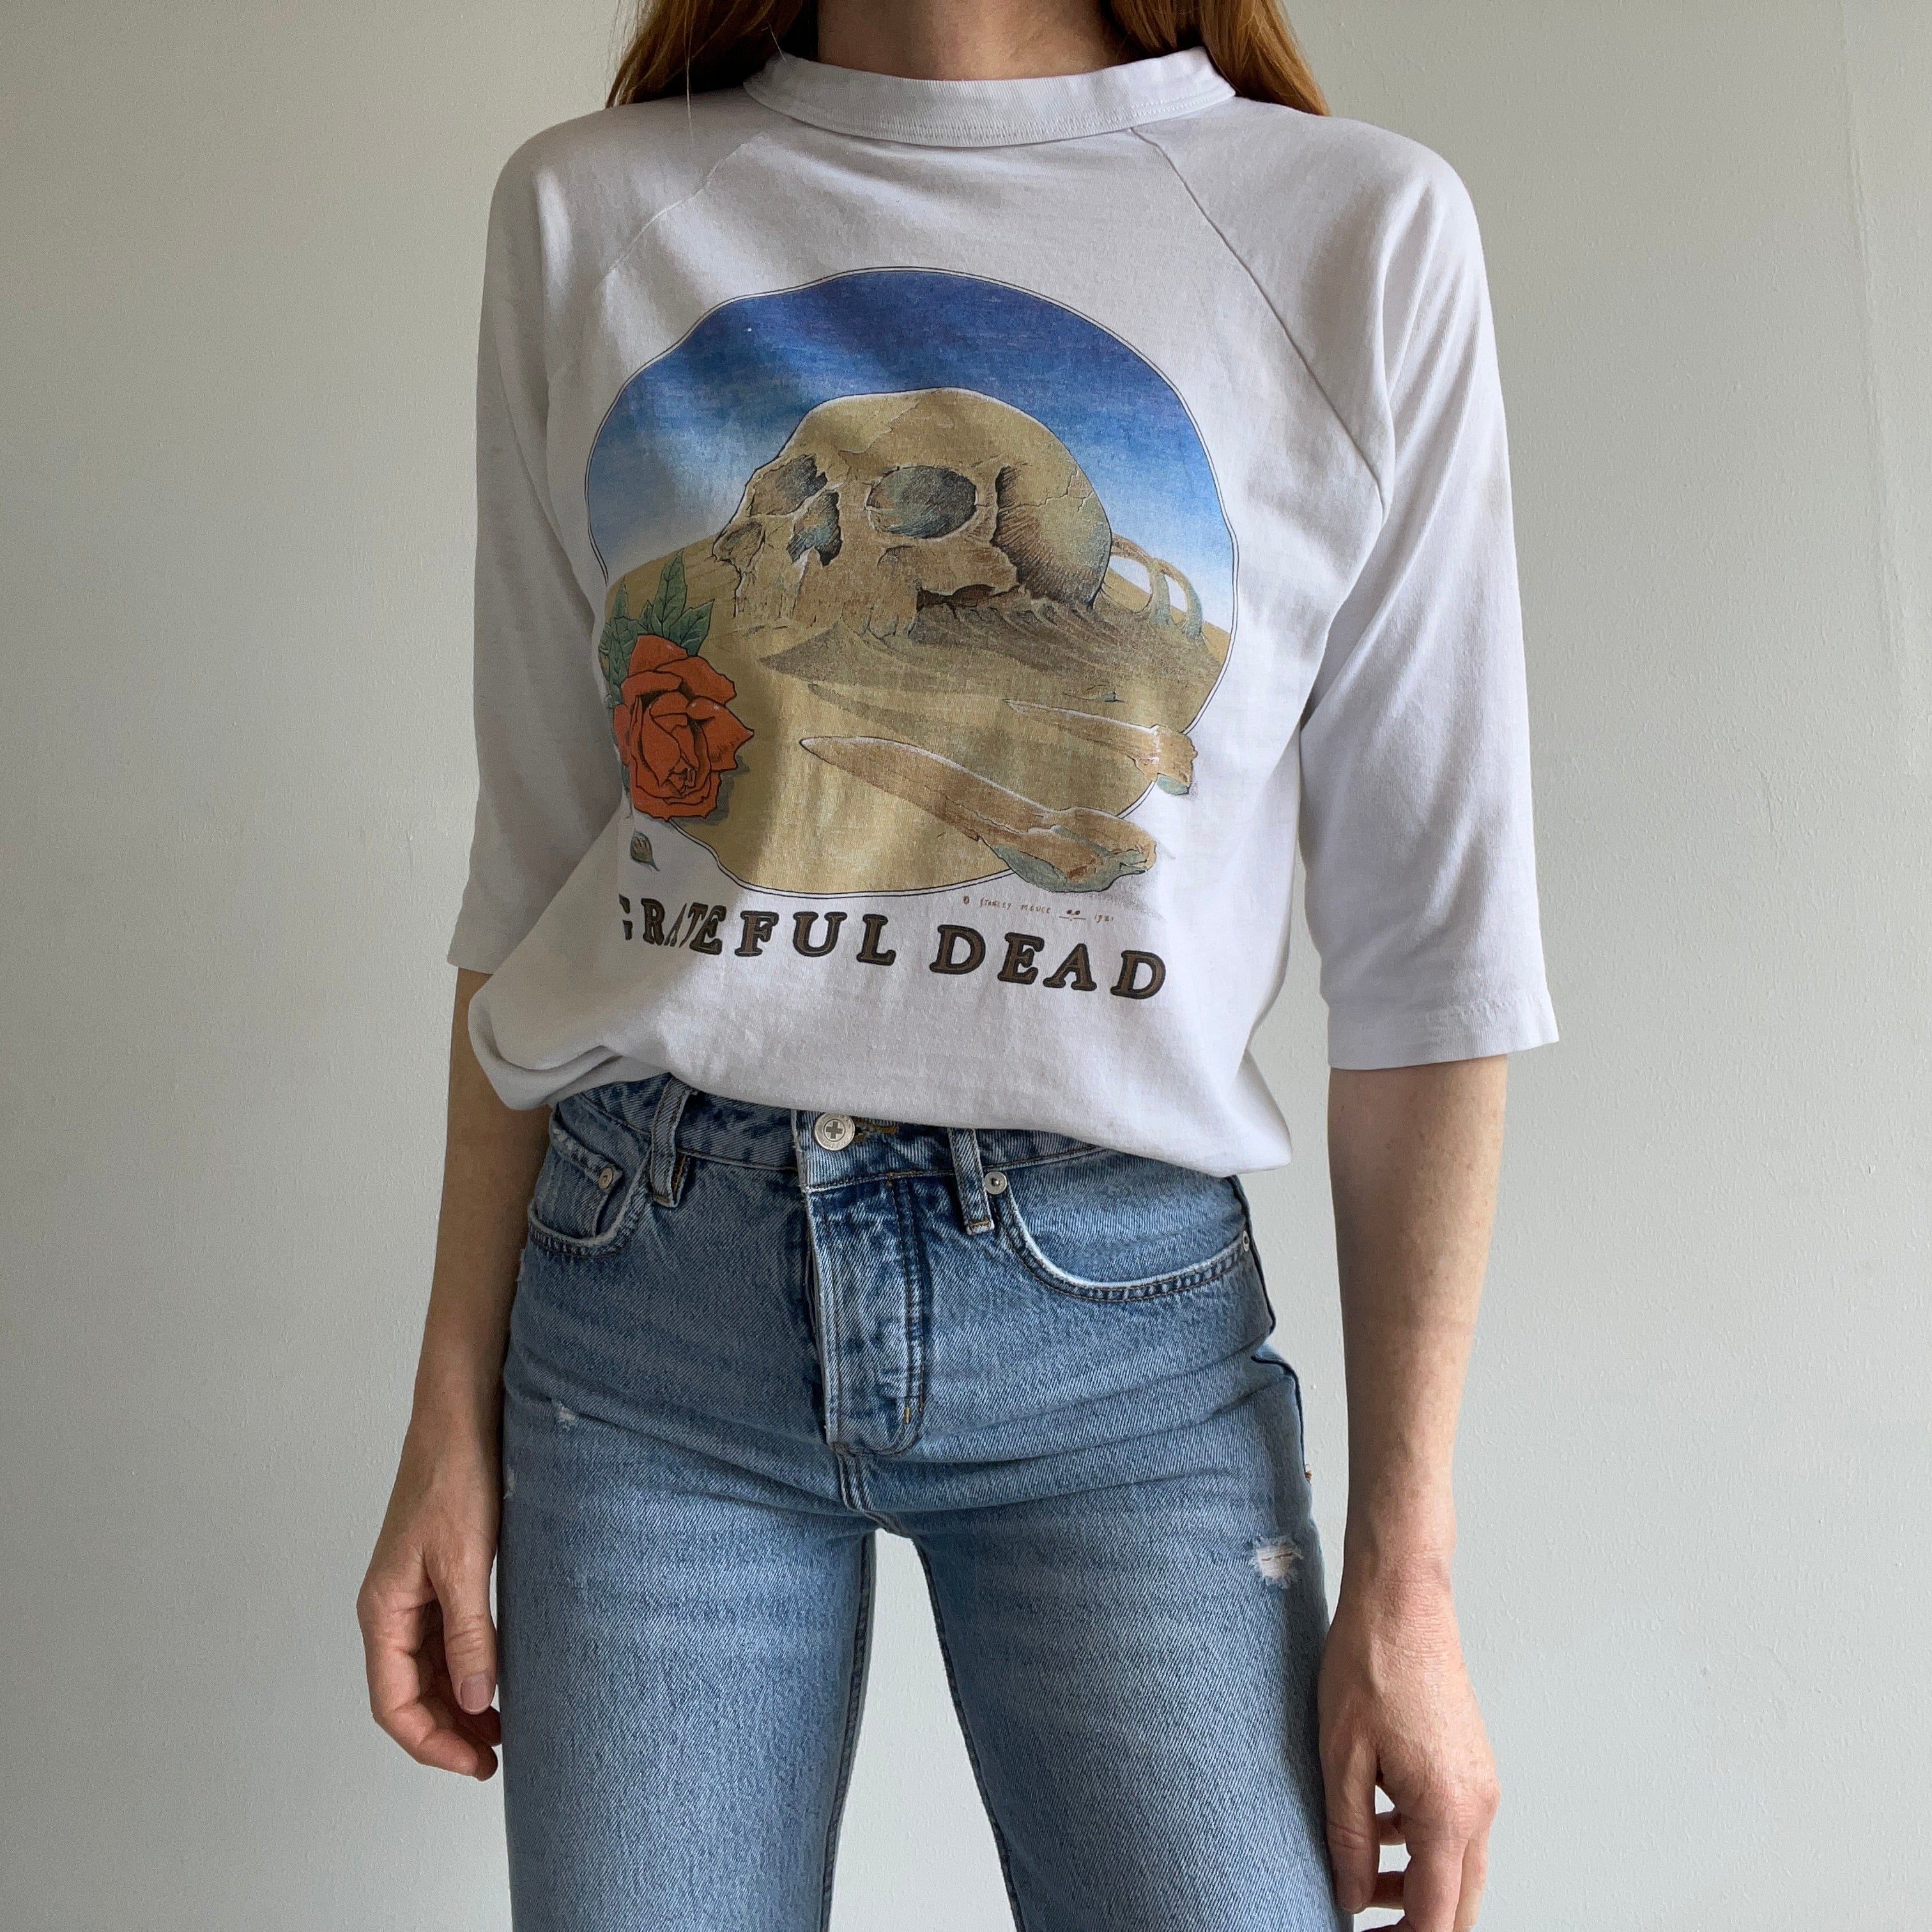 1981 !RARE! Grateful Dead European Tour Baseball Tee - Thin and Stained